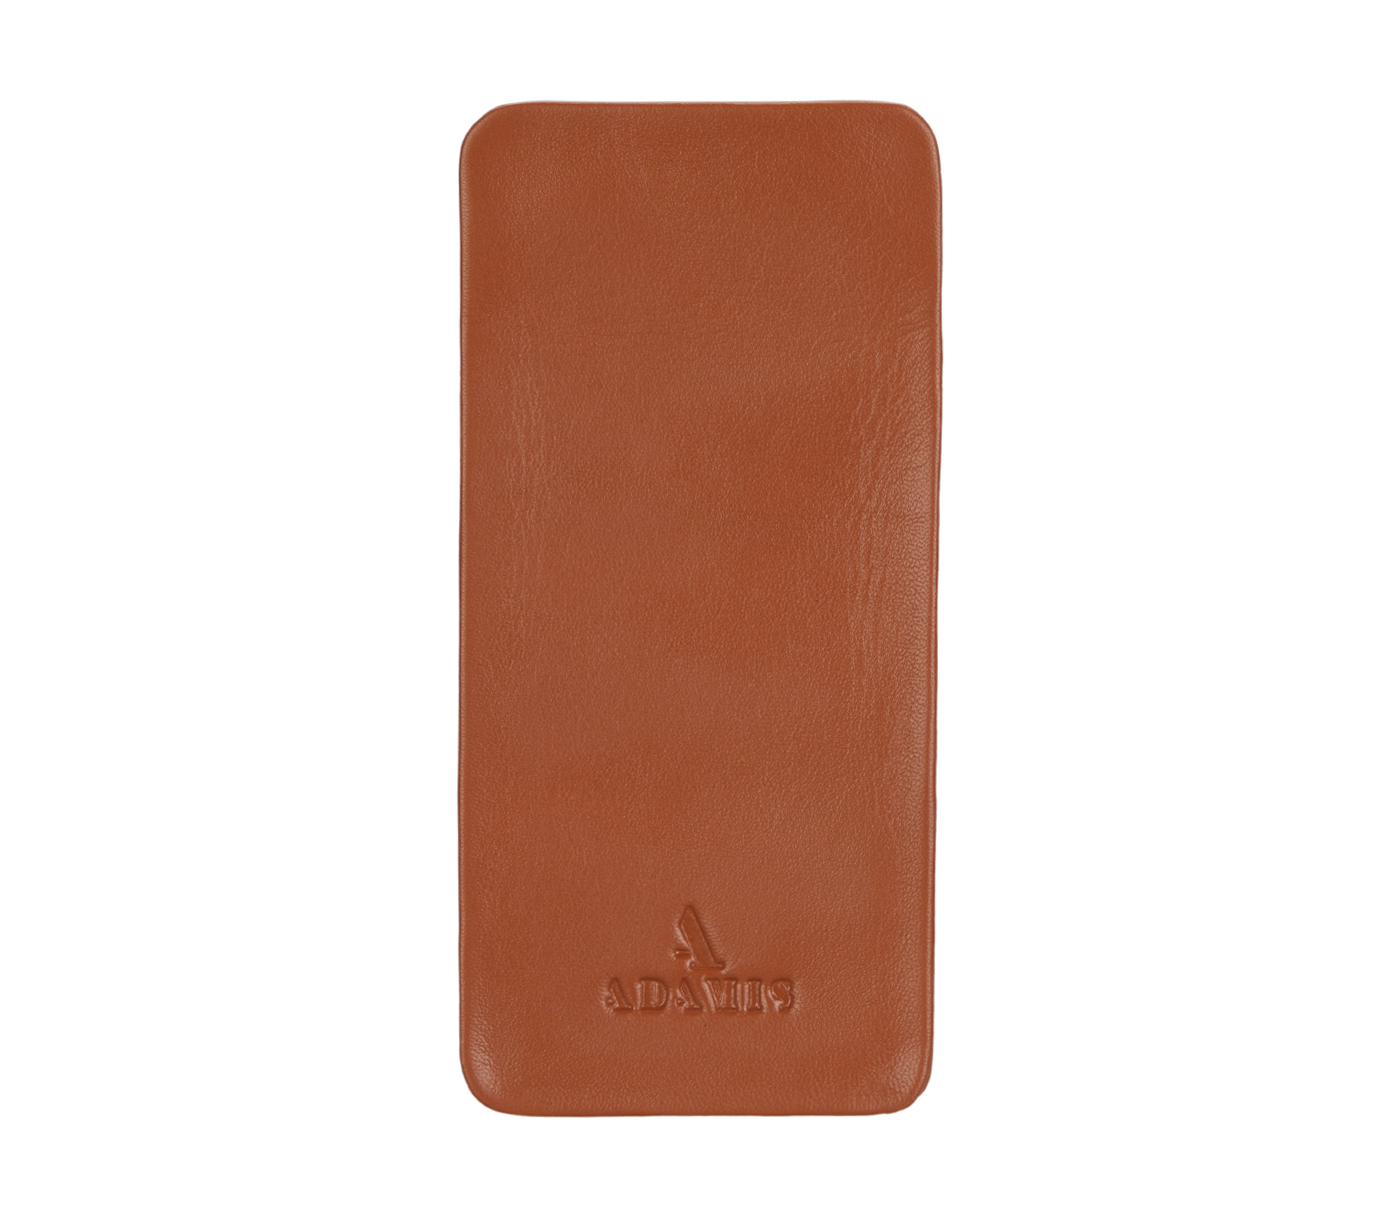 VW11--Soft stitch free spectacle case in Genuine Leather - Tan